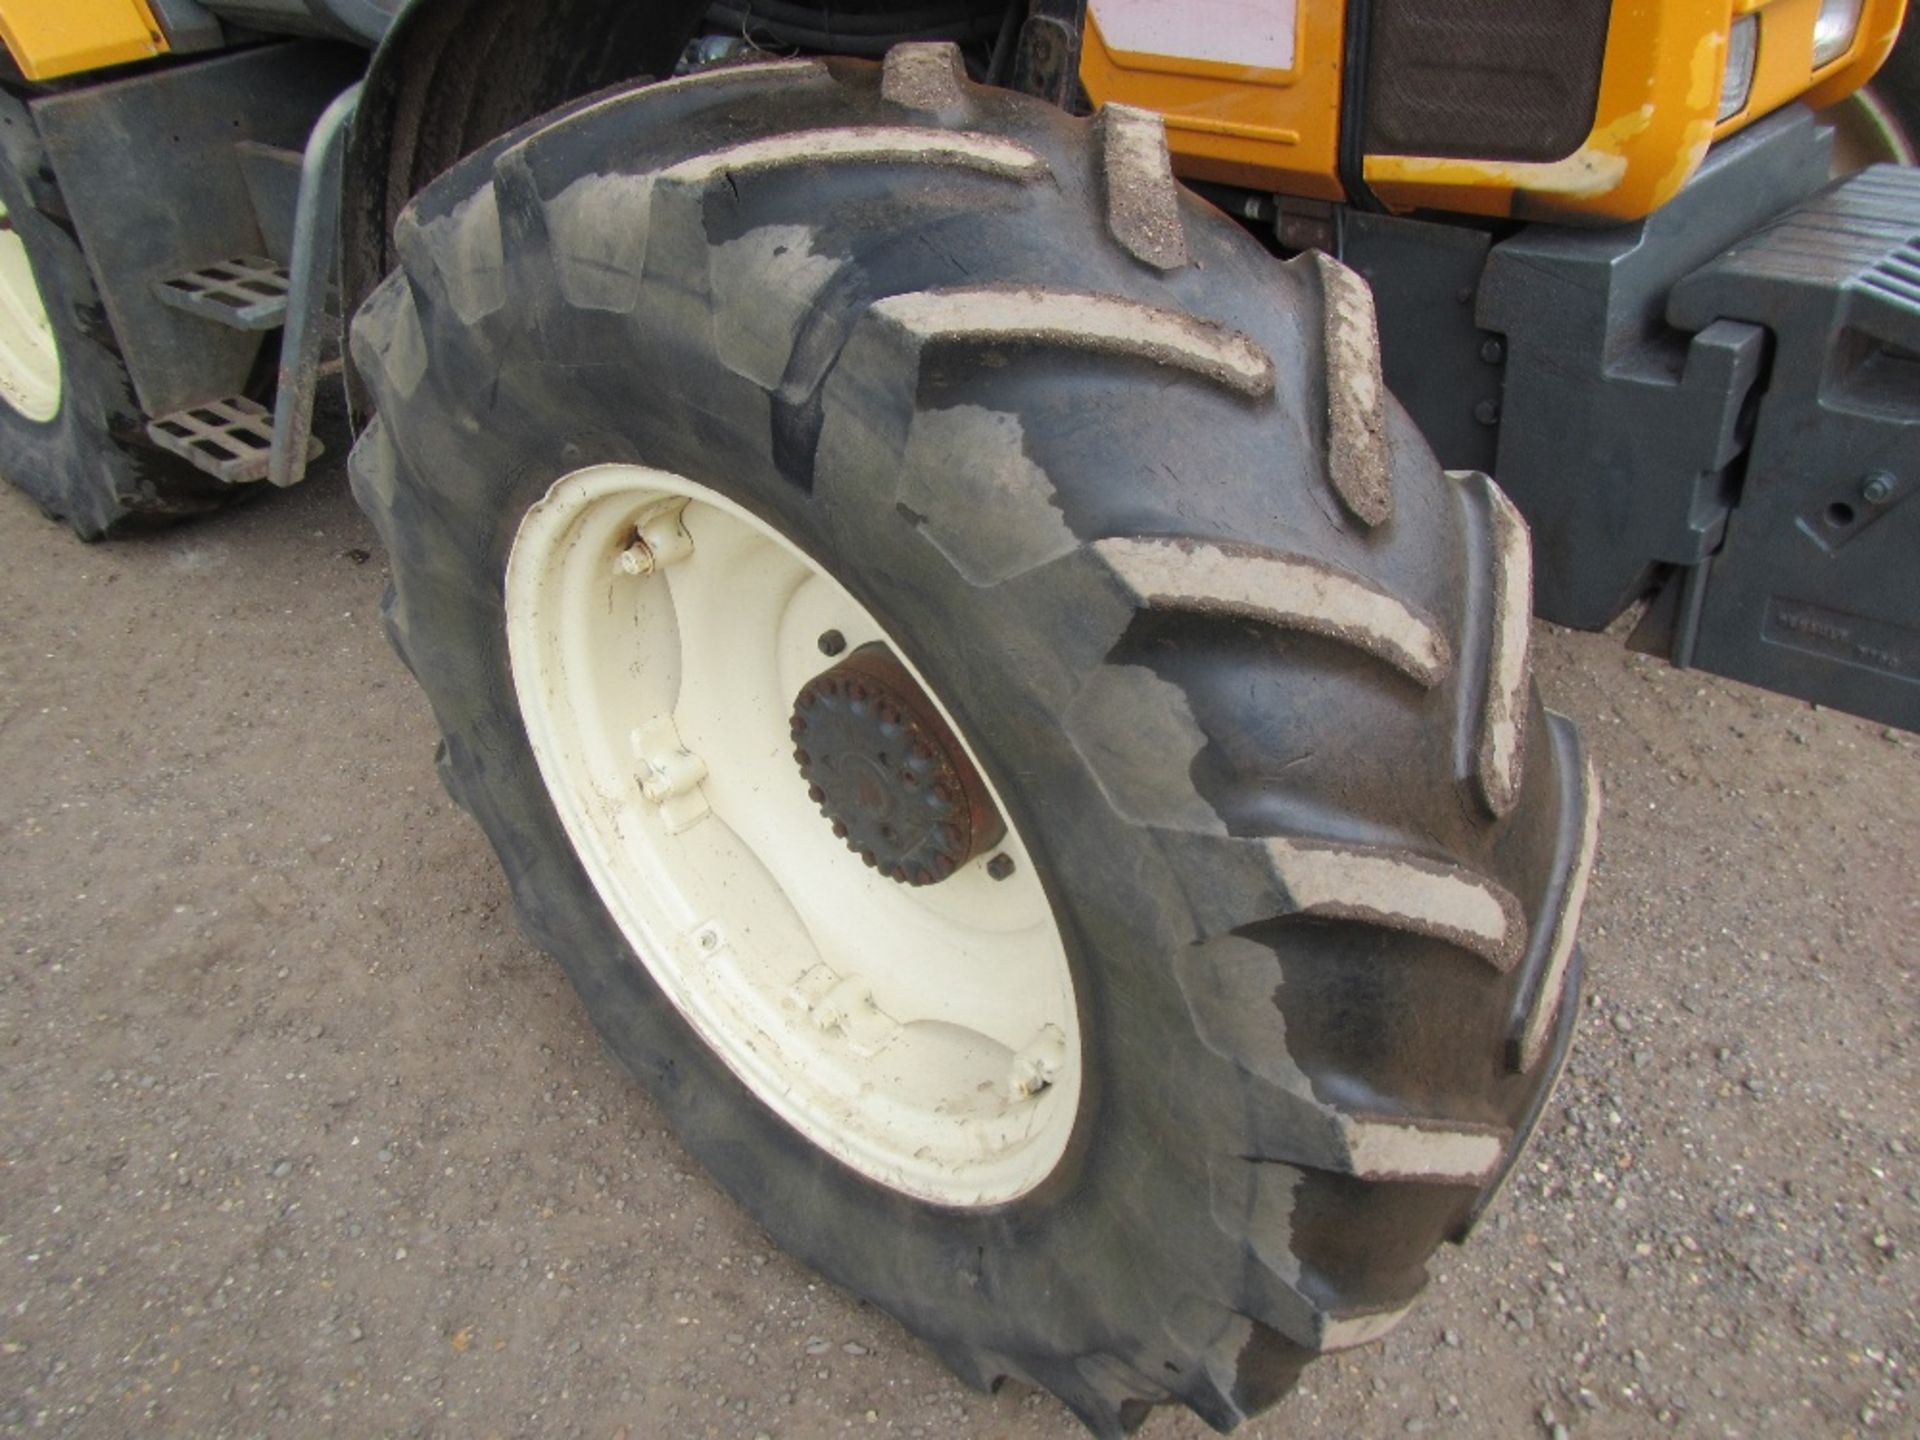 Renault 106-54 TL 4wd Tractor c/w 40k transmission, front weights Reg. No. M895 HSE - Image 5 of 18